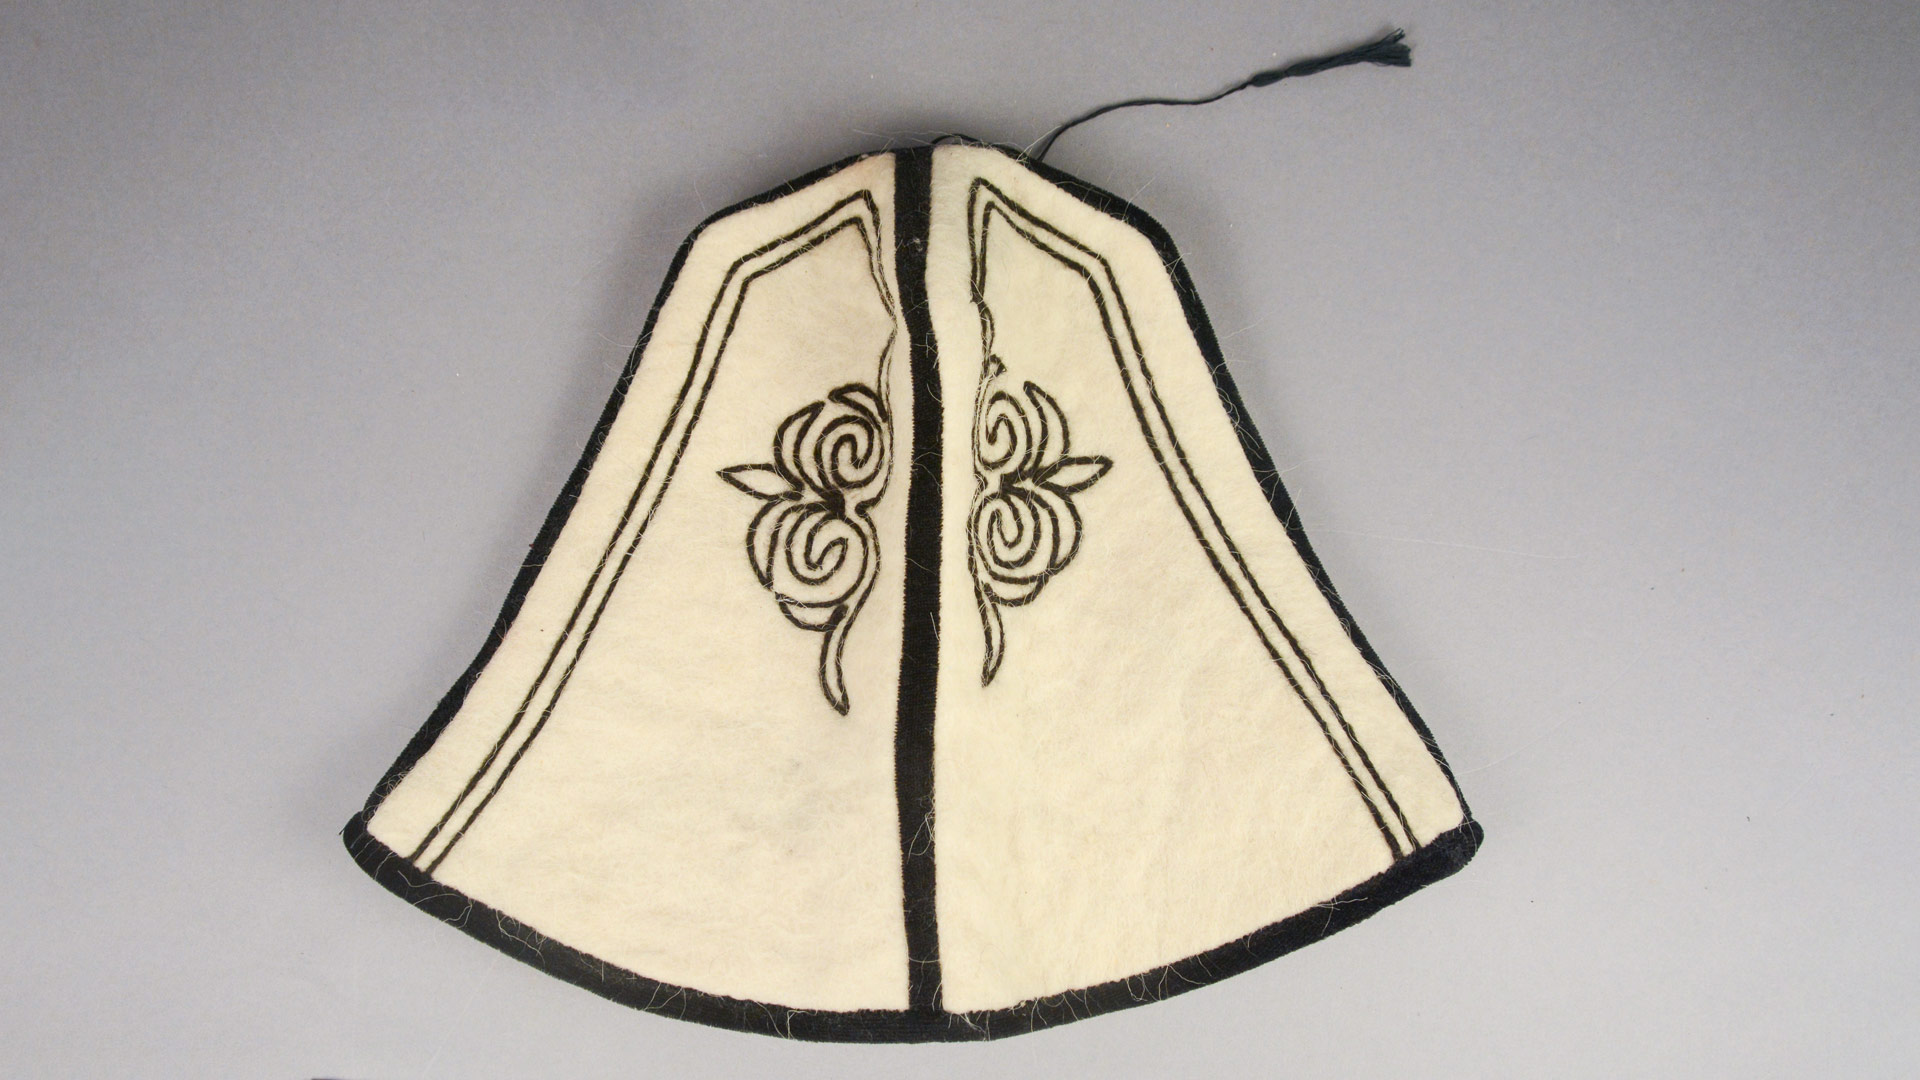 white bell-shaped hat with black embroidery